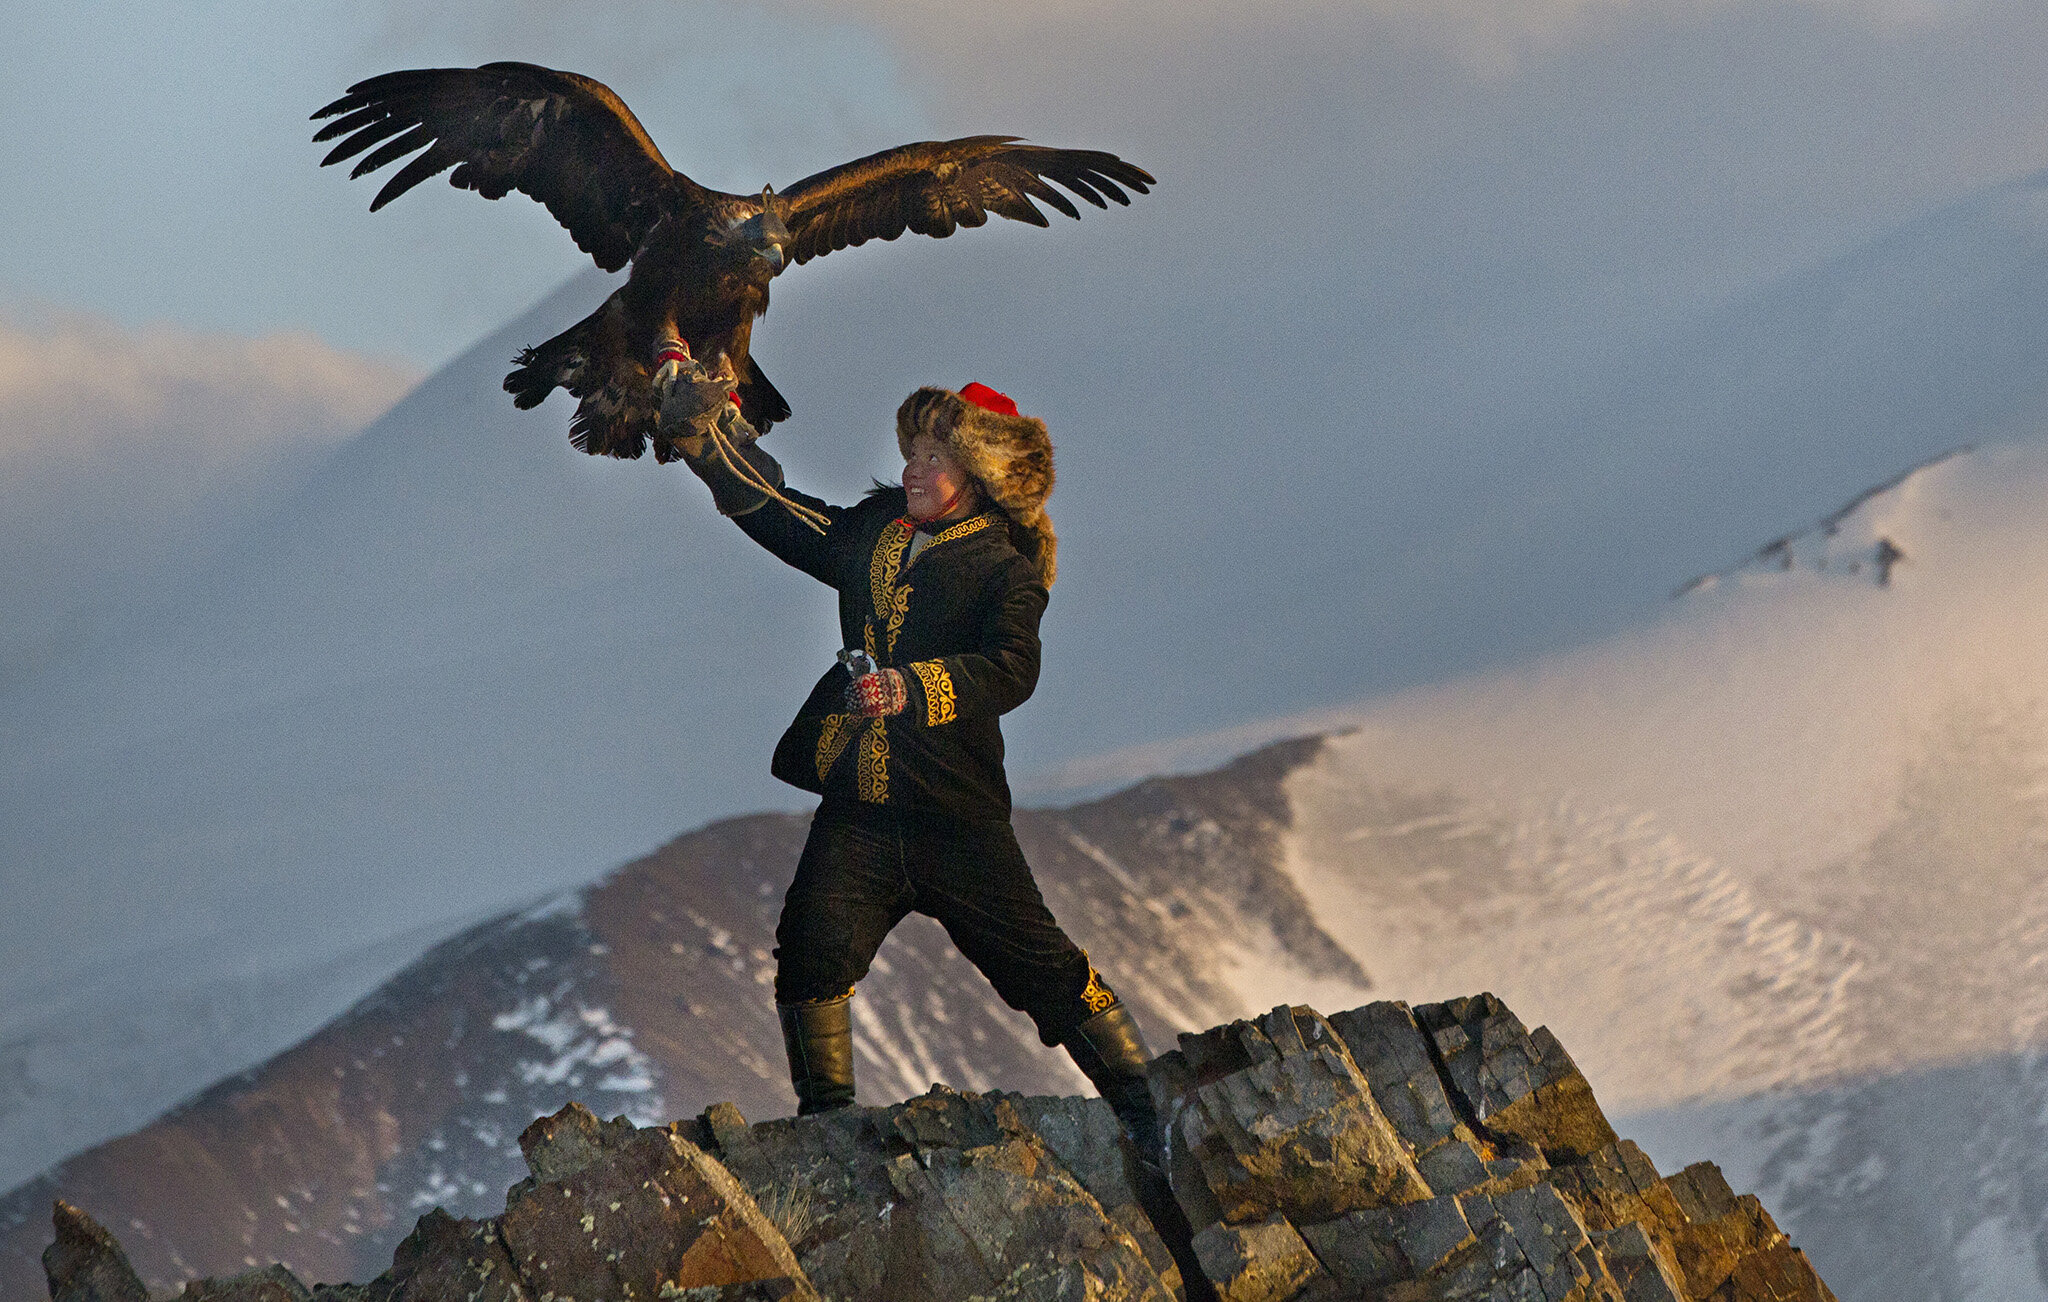 PICTURED: 13-year old Nurgaiv of Kazakhstan hunts the mountains of her home with a golden eagle - carrying on an ancient tradition. Images of Nurgaiv taken by Asher Svidensky went viral in 2014.